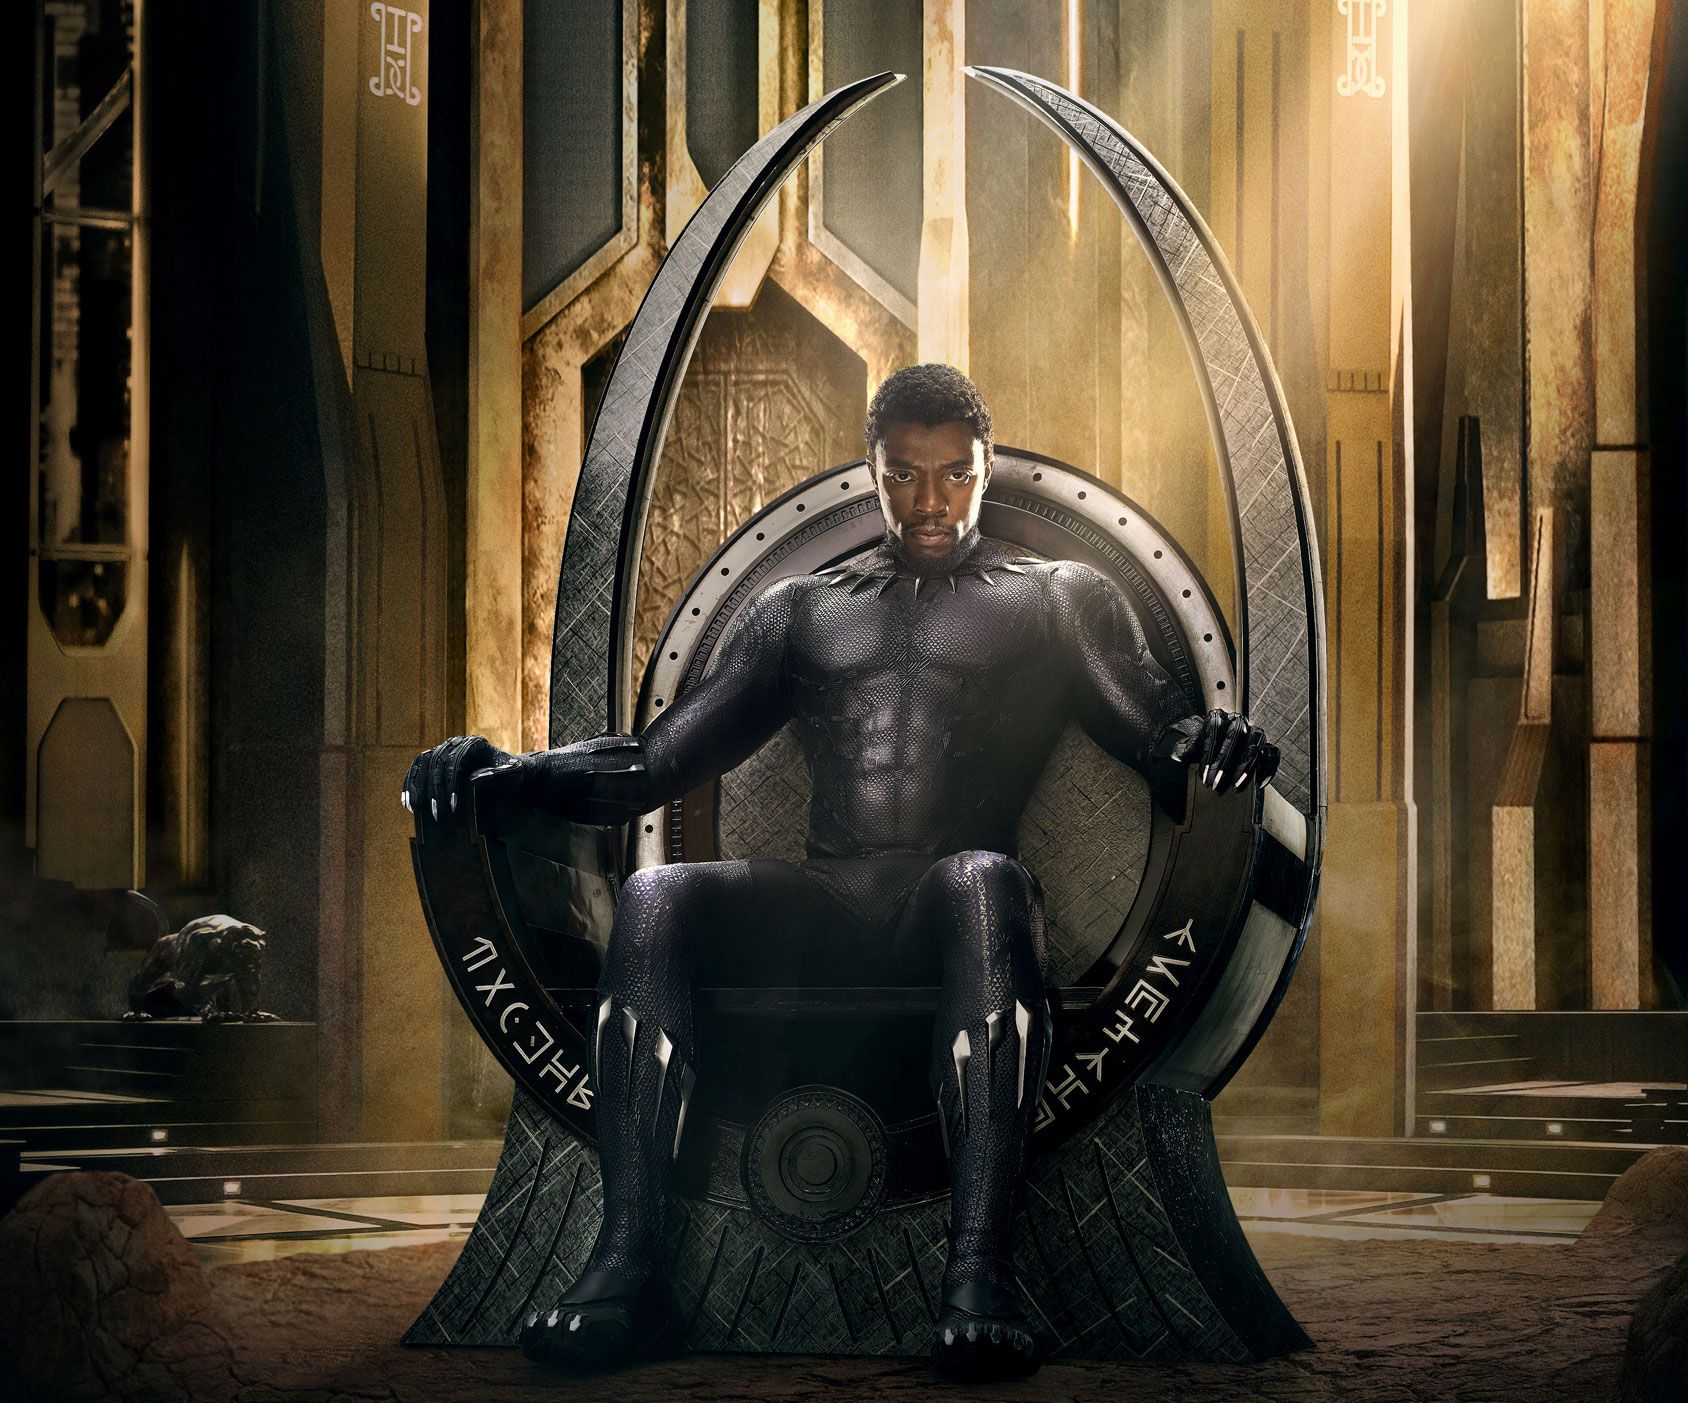 Black Panther movie cast, plot, release date and everything you need to know